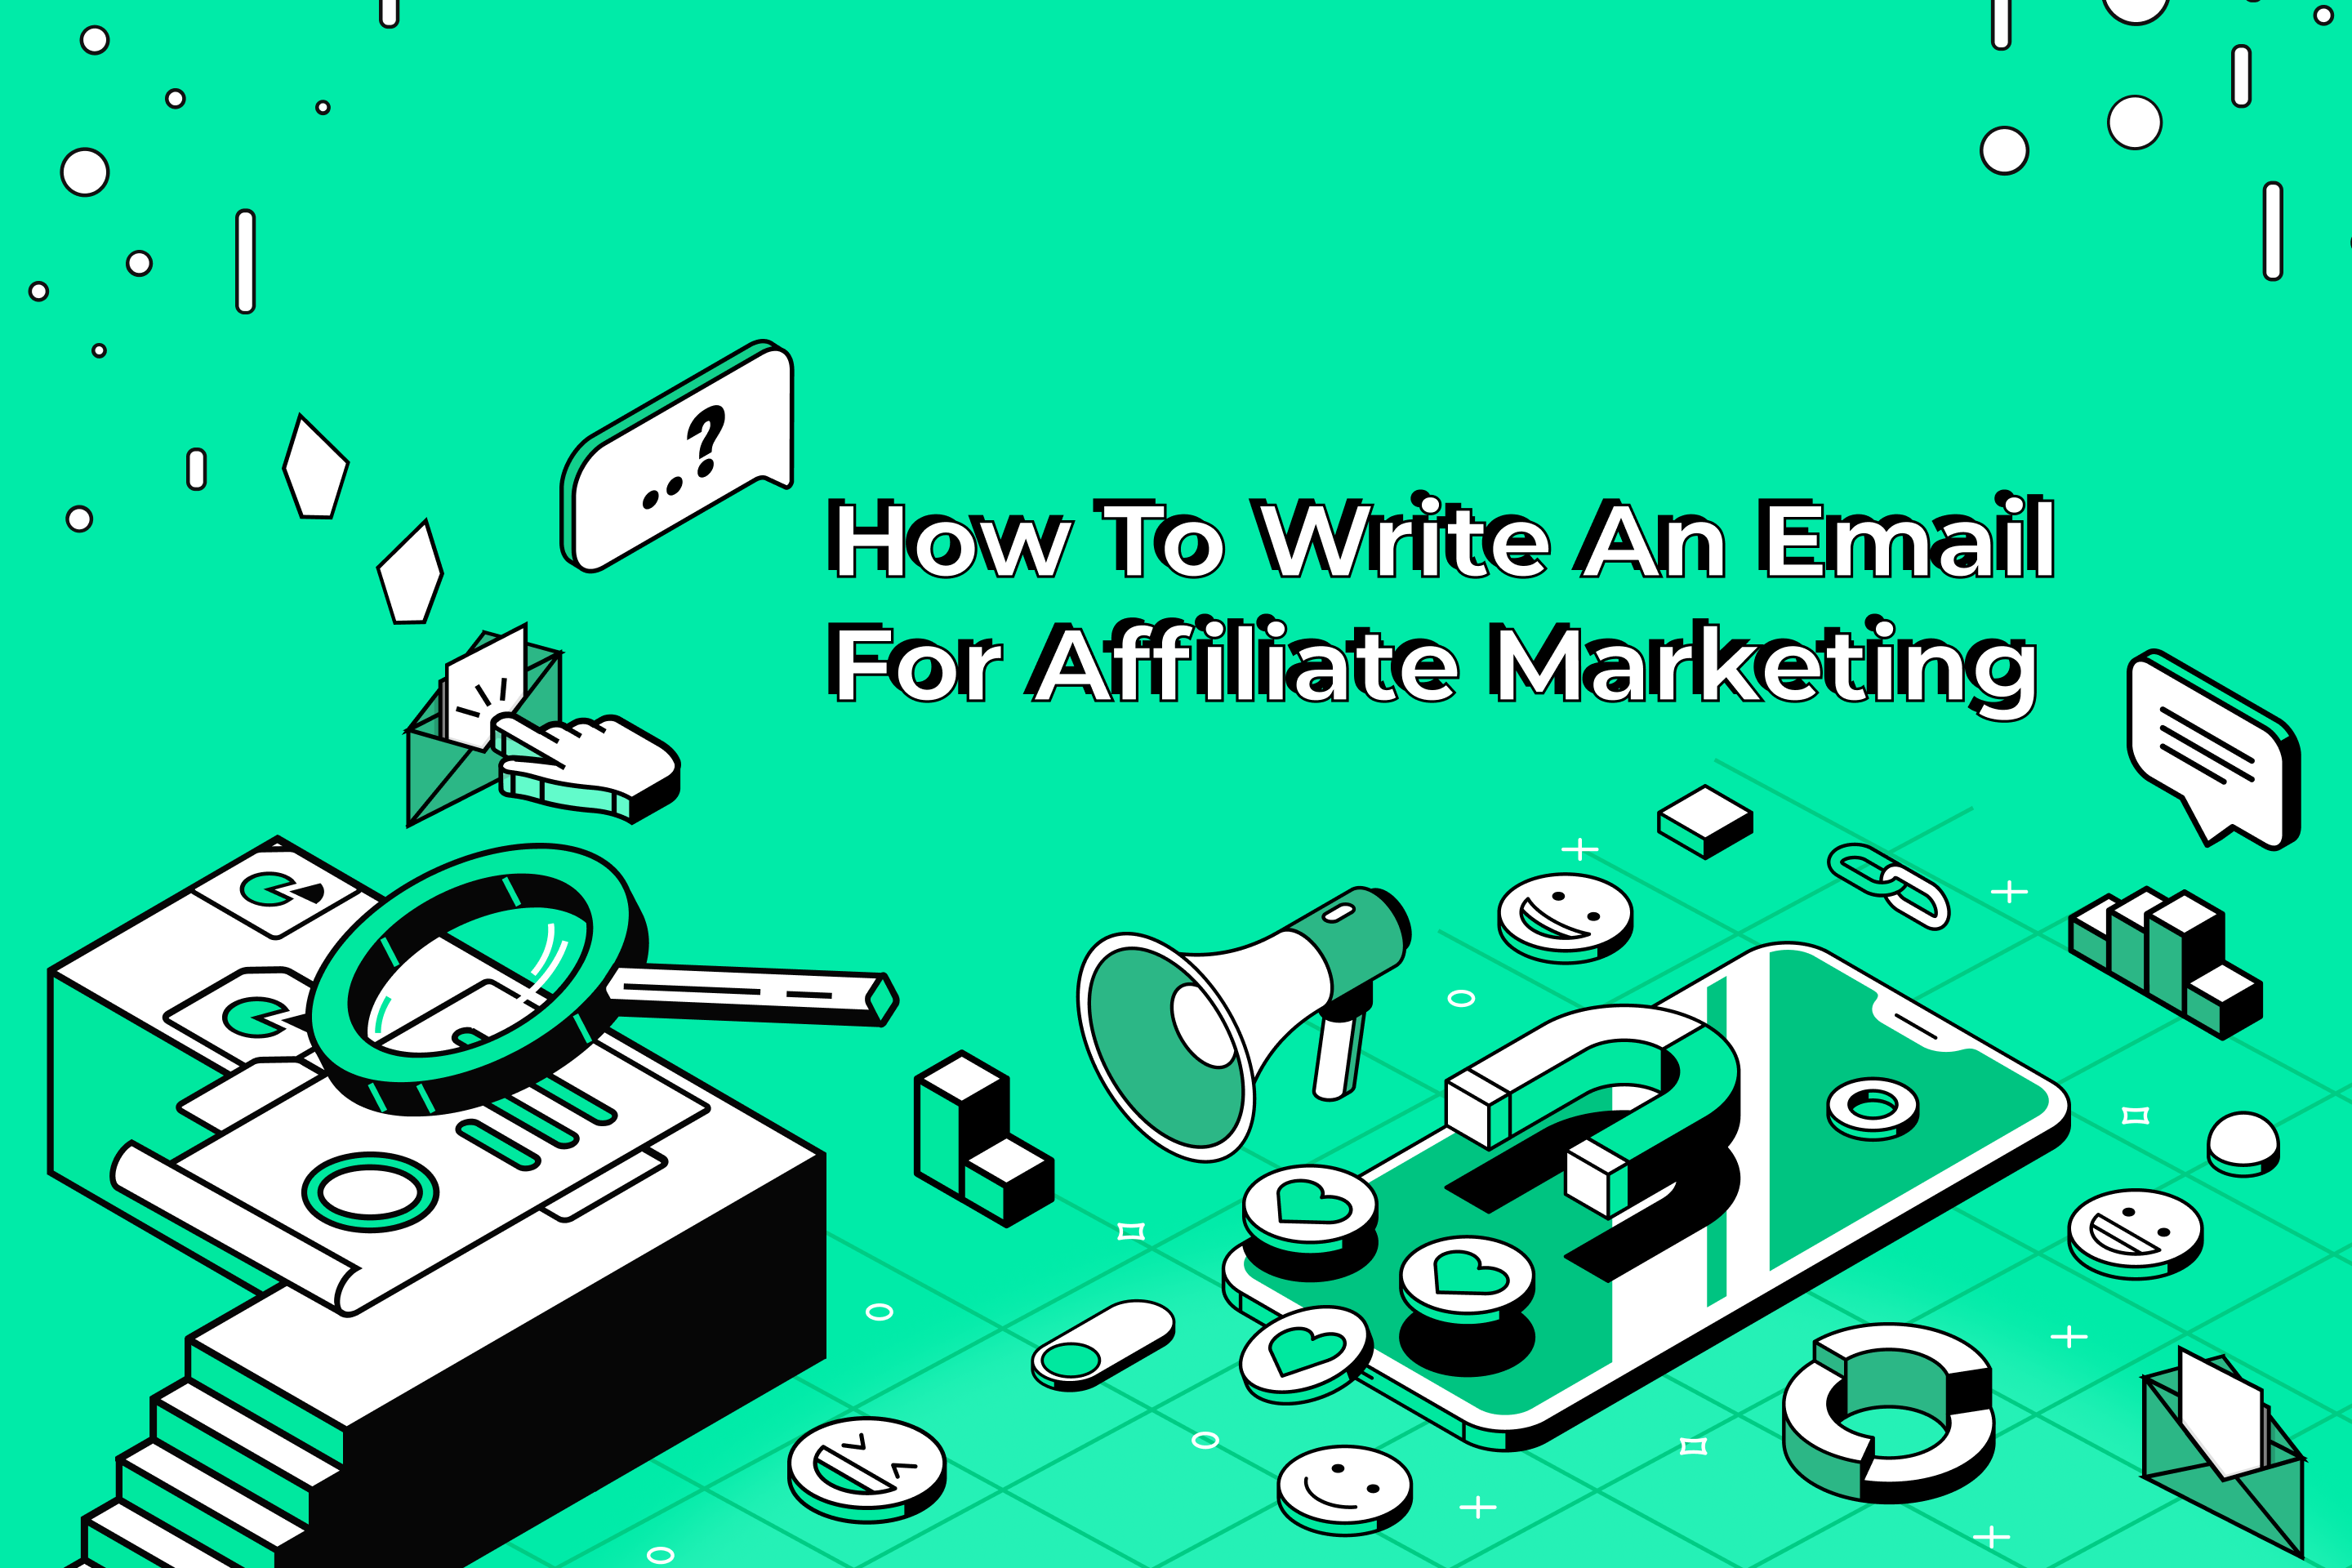 How To Write an Email for Affiliate Marketing